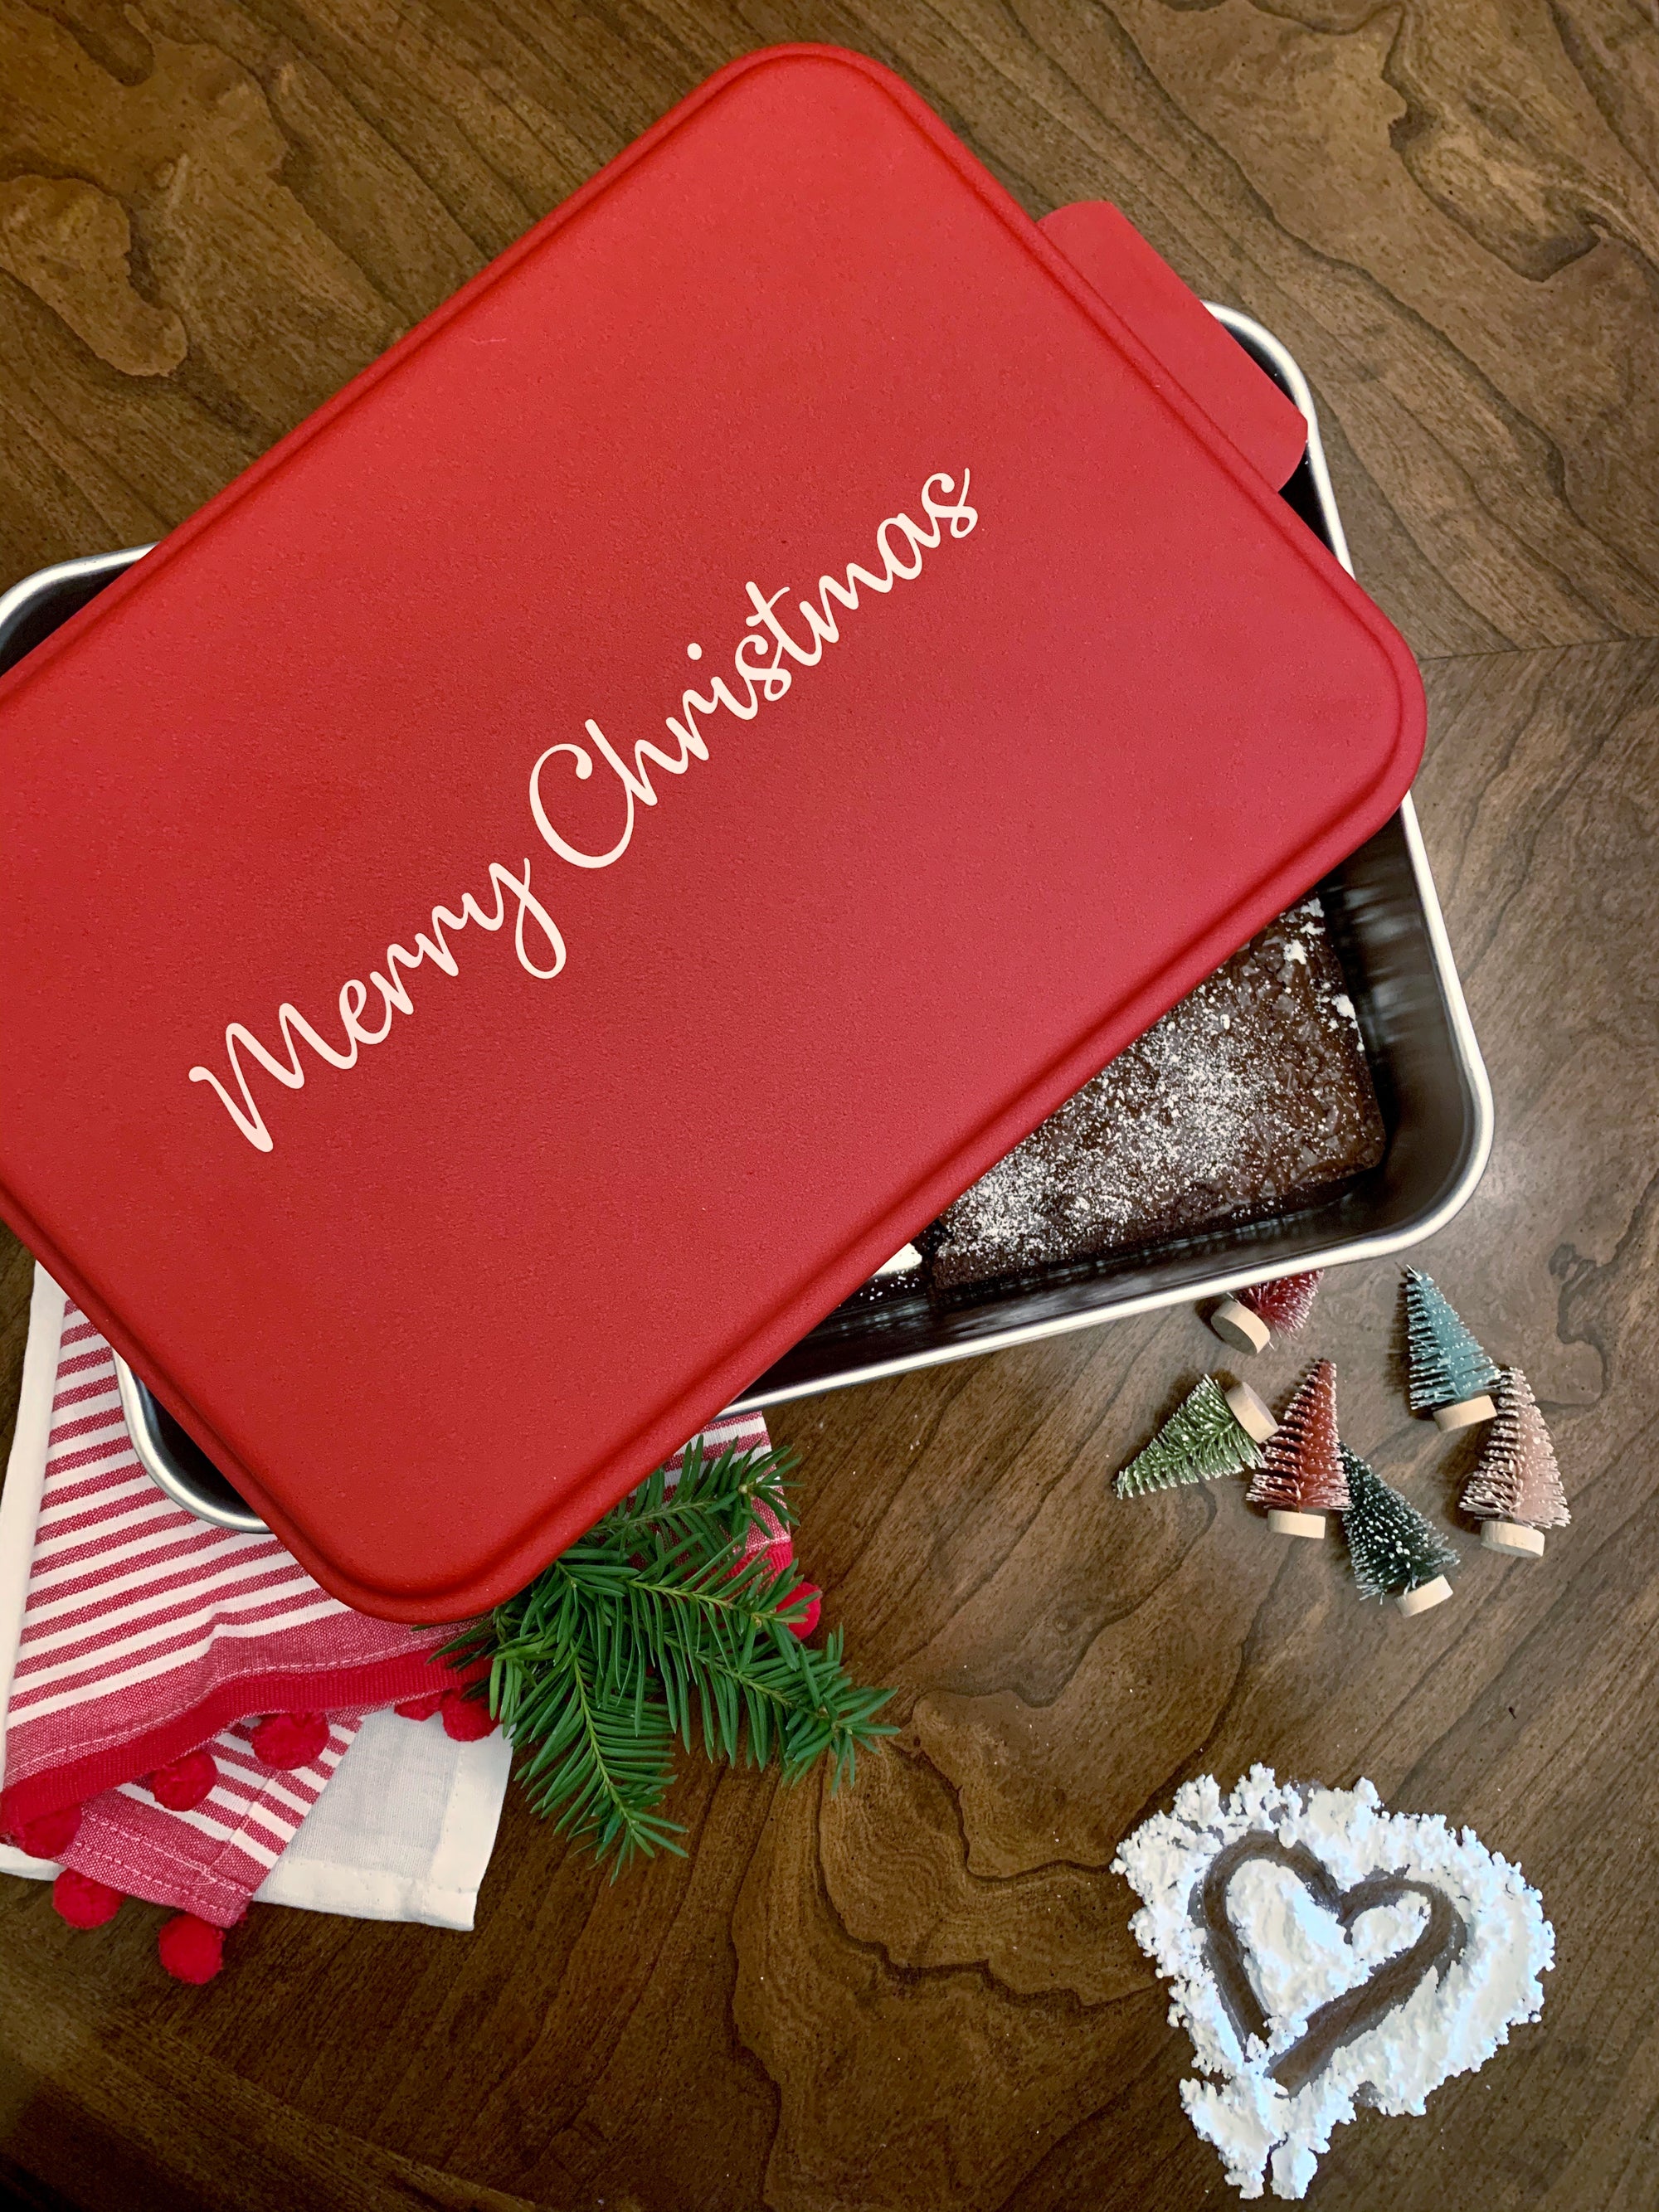 9" x 13" Aluminum Cake Pan with Red Lid - Merry Christmas - ImpressMeGifts